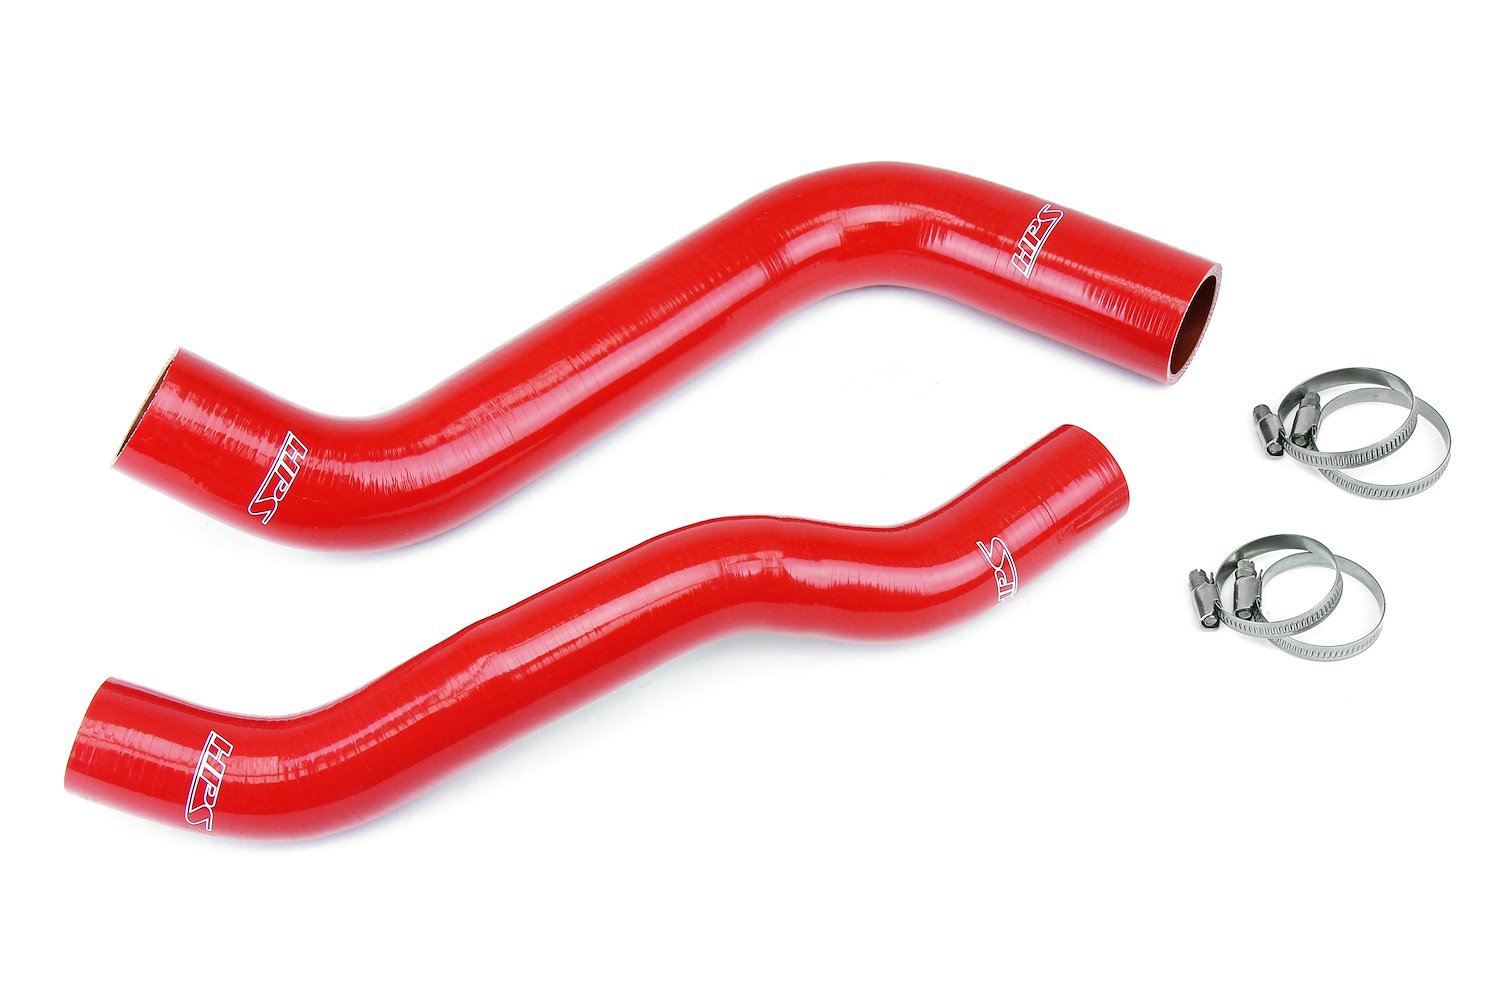 57-1835-RED Radiator Hose Kit, 3-Ply Reinforced Silicone, Replaces Rubber Radiator Coolant Hoses